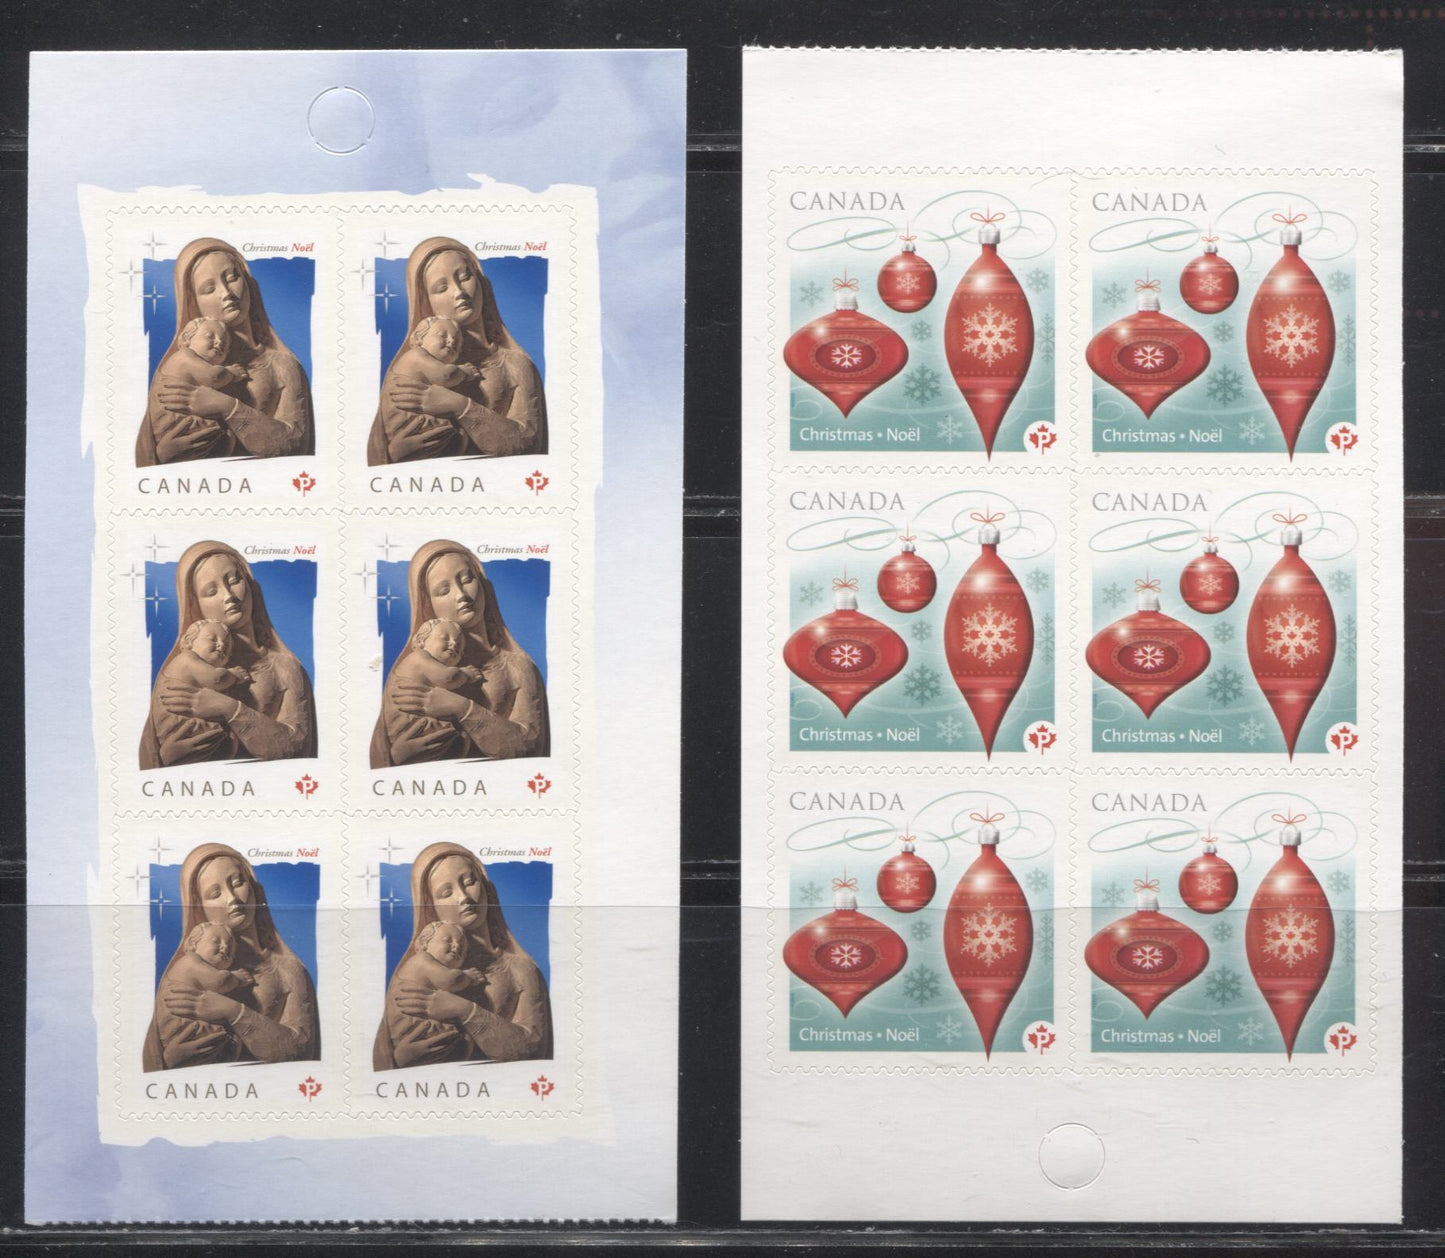 Lot 39 Canada #2412-2413 2010 Christmas Issue, VFNH Booklet Panes of 6